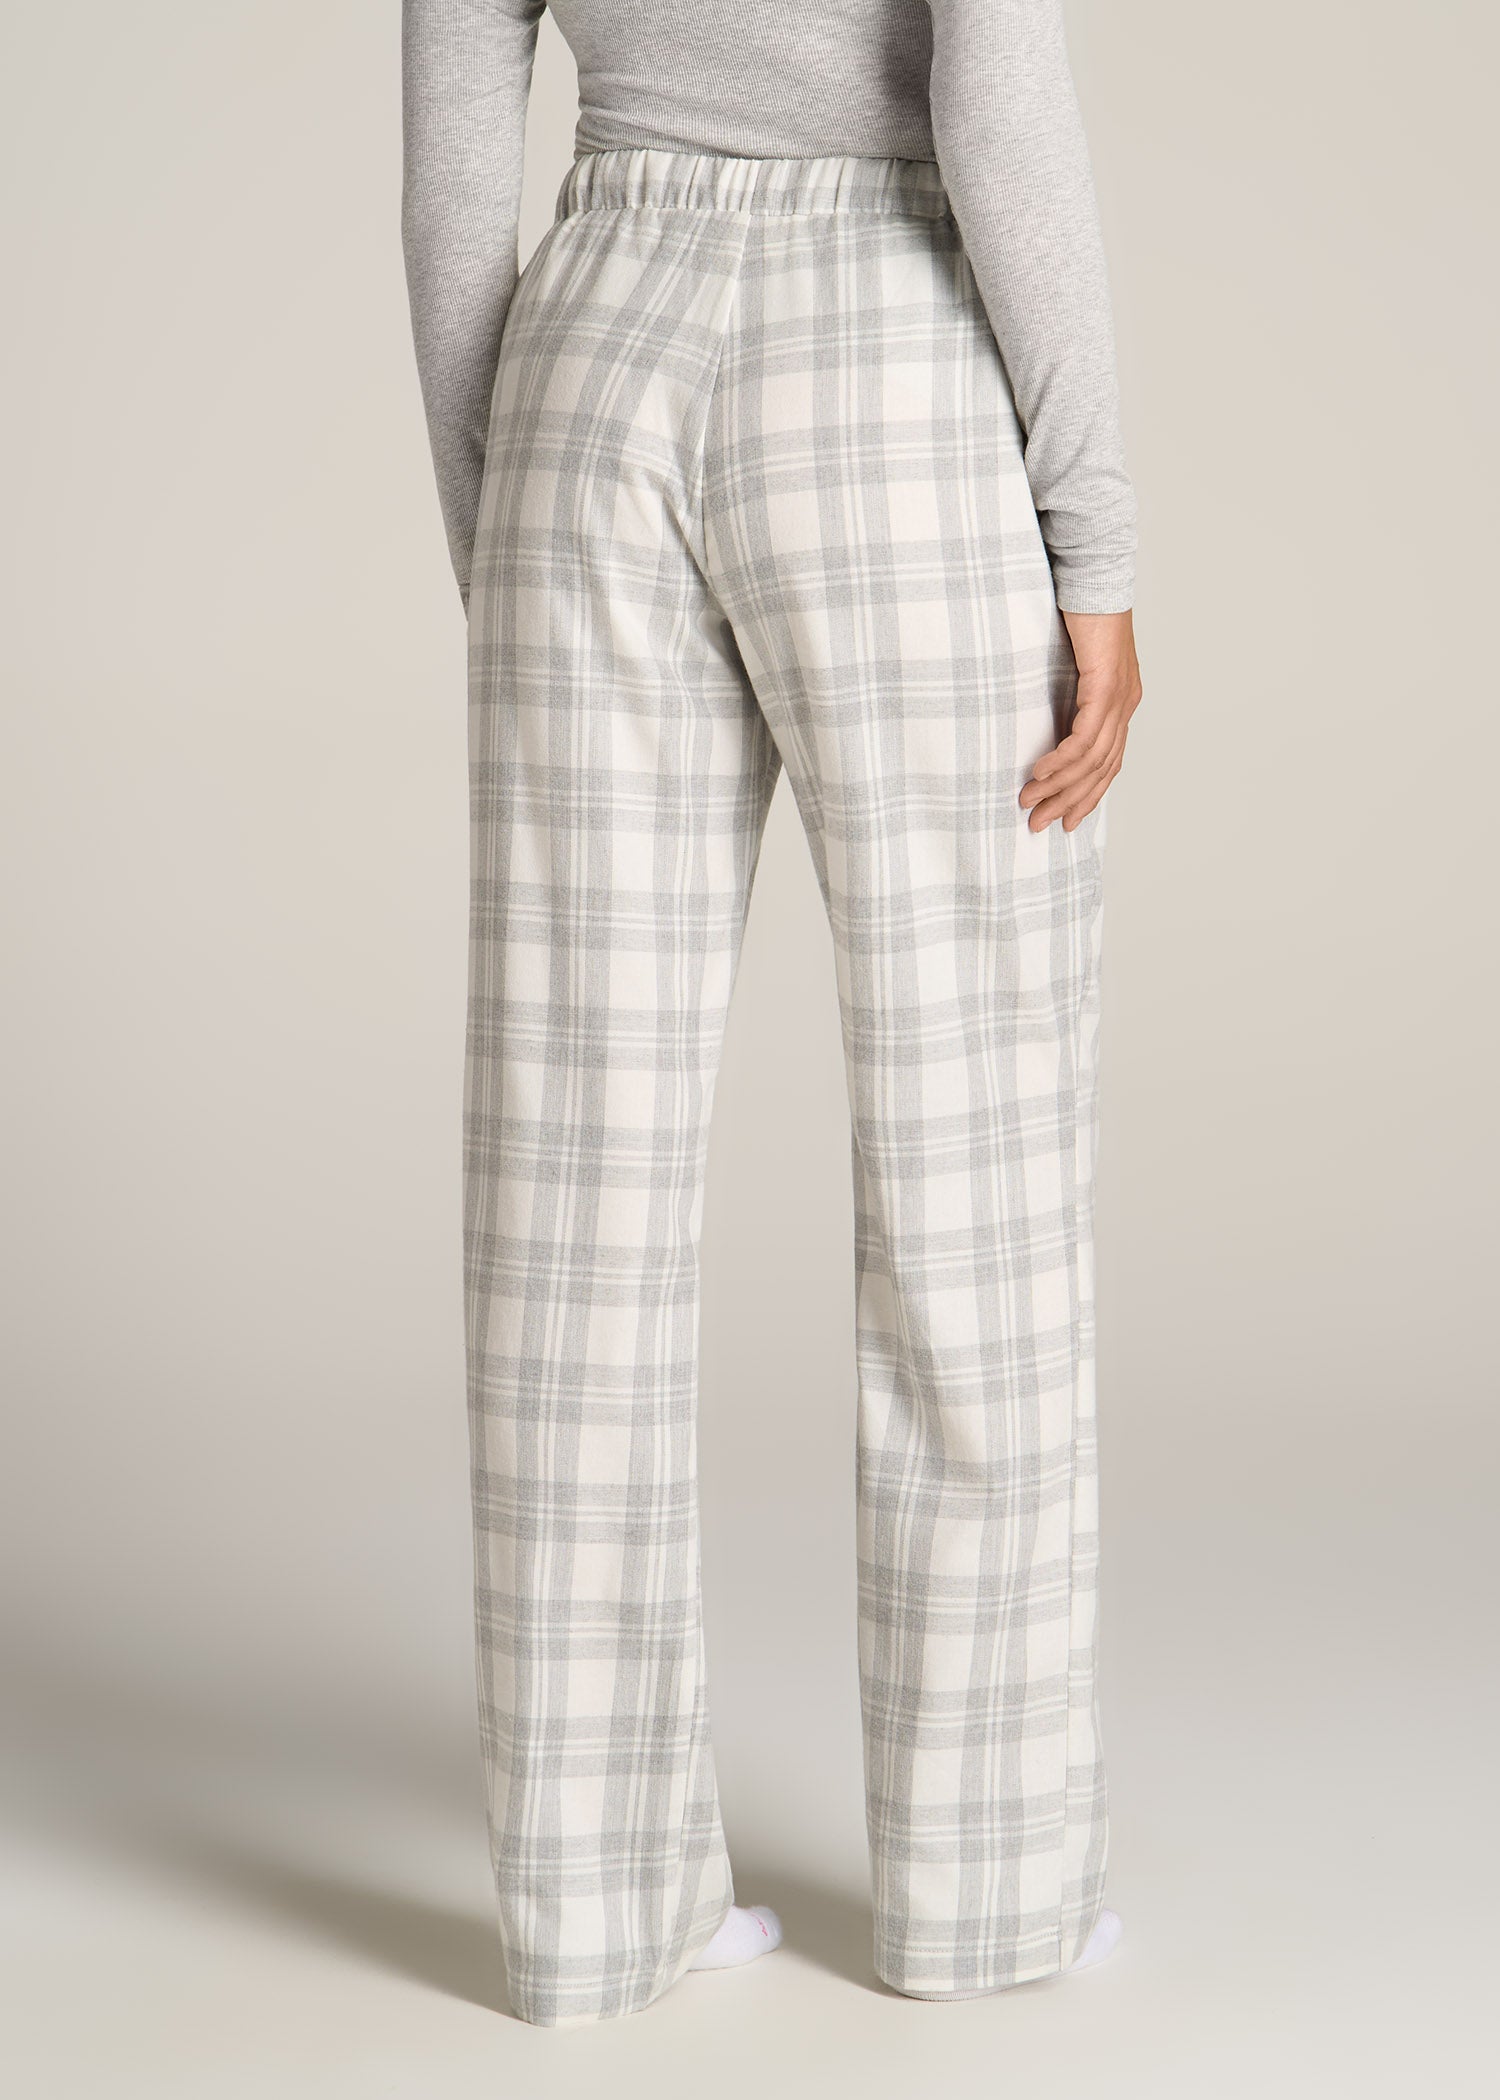 Plaid Flannel Lounge Joggers for Women